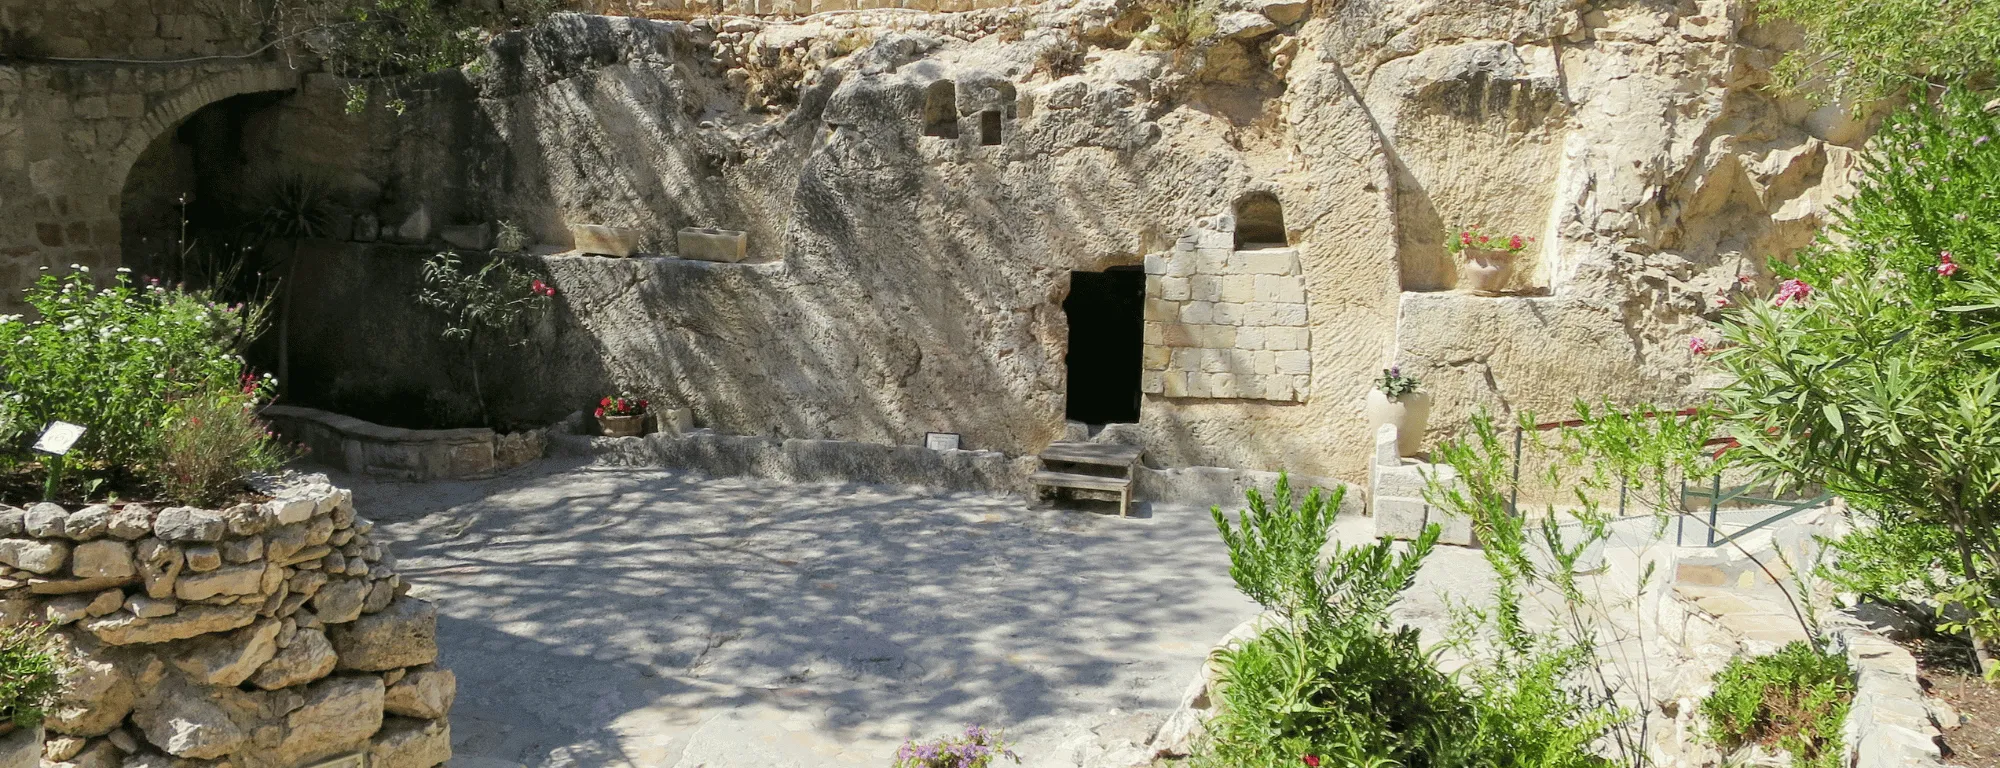 The Garden Tomb Jerusalem in Israel, Middle East | Gardens - Rated 4.2